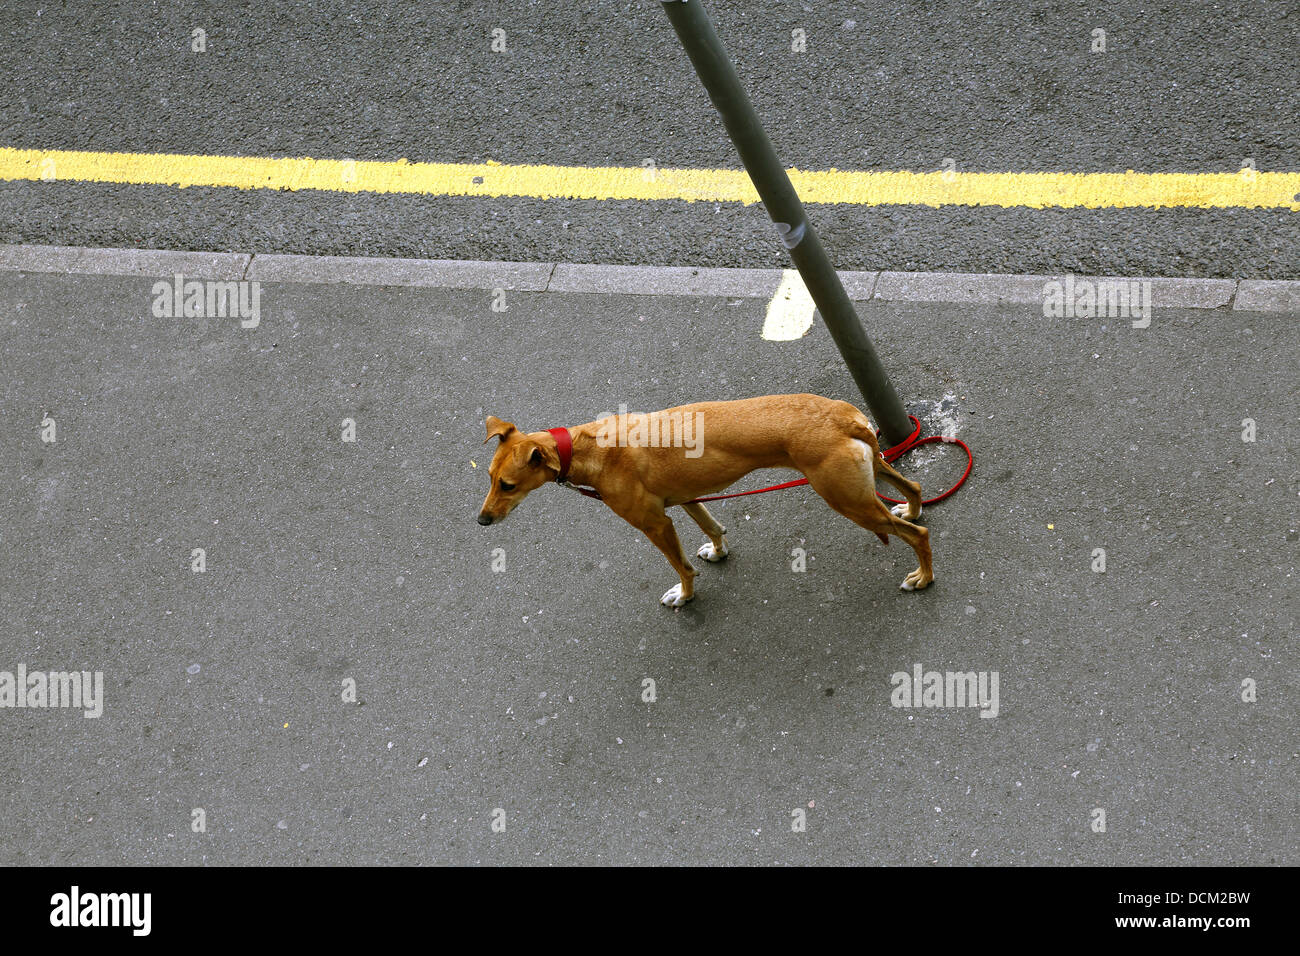 Tethered dog on a leash tied to a lamppost in the road. Stock Photo